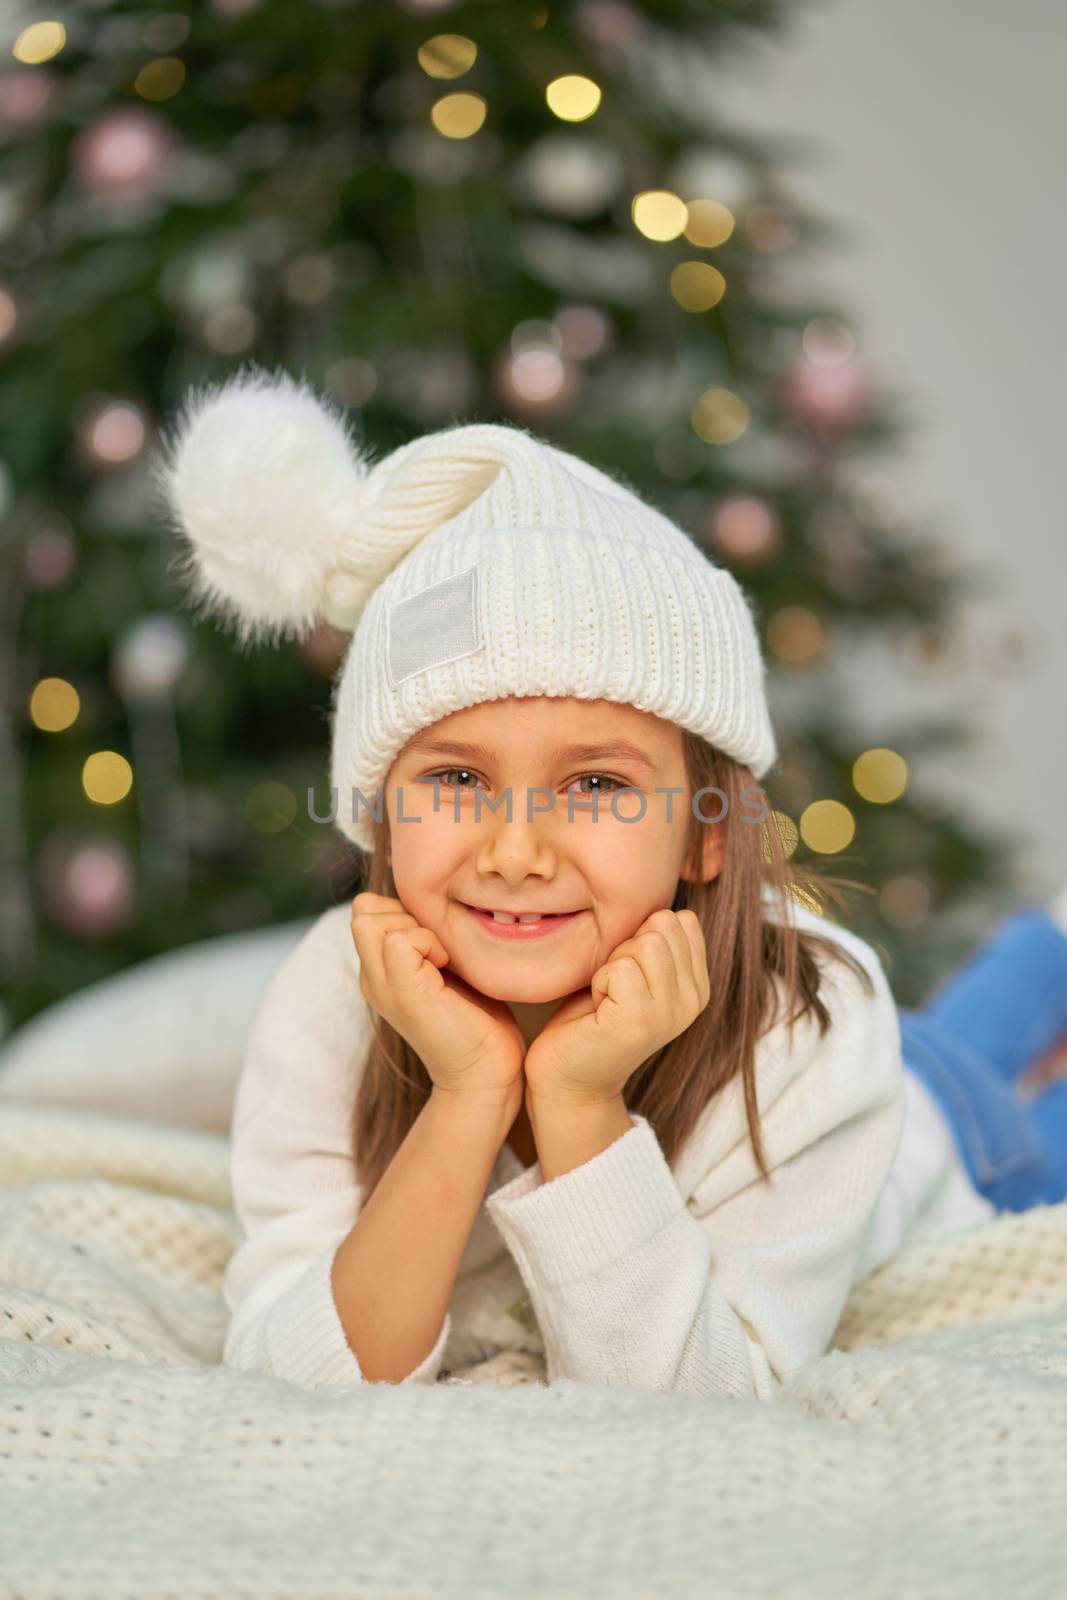 Happy childhood, Christmas magic fairy tale. Little girl waiting for Christmas and holiday gifts